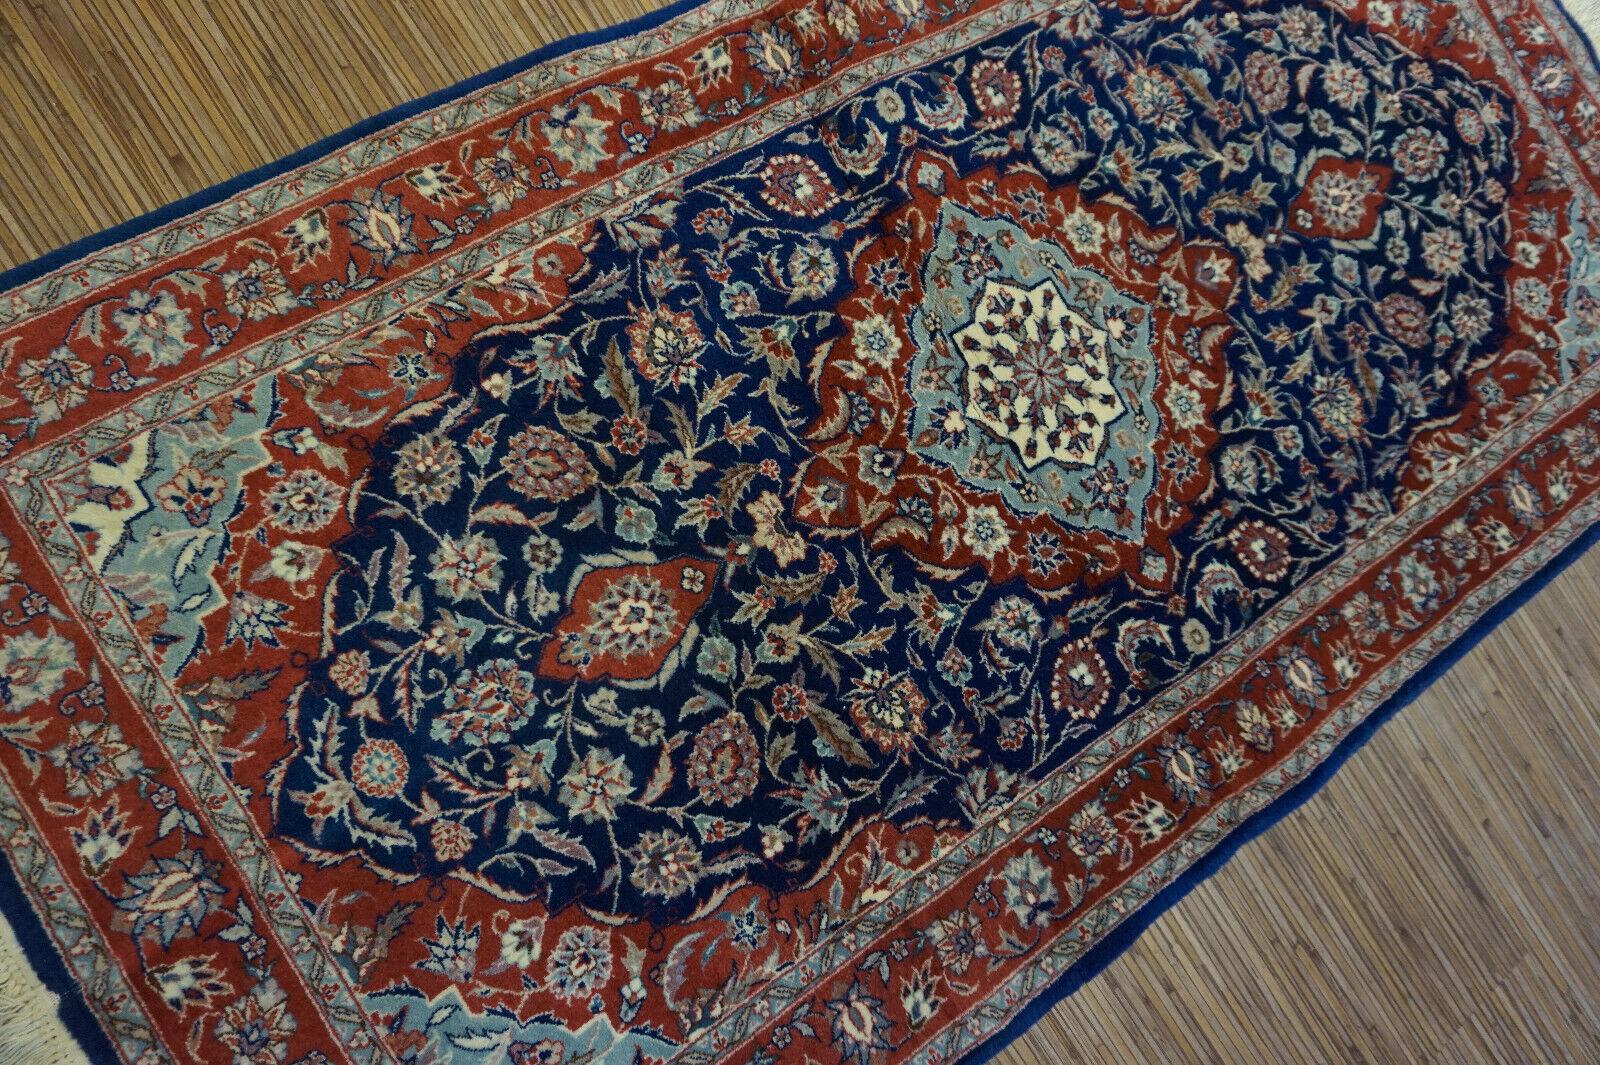 Handmade vintage Isfahan rug in traditional medallion design. The rug is from the end of 20th century in original good condition. It is made in wool.

-condition: original good,

-circa: 1970s,

-size: 2.3' x 4.5' (72cm x 140cm),

-material: